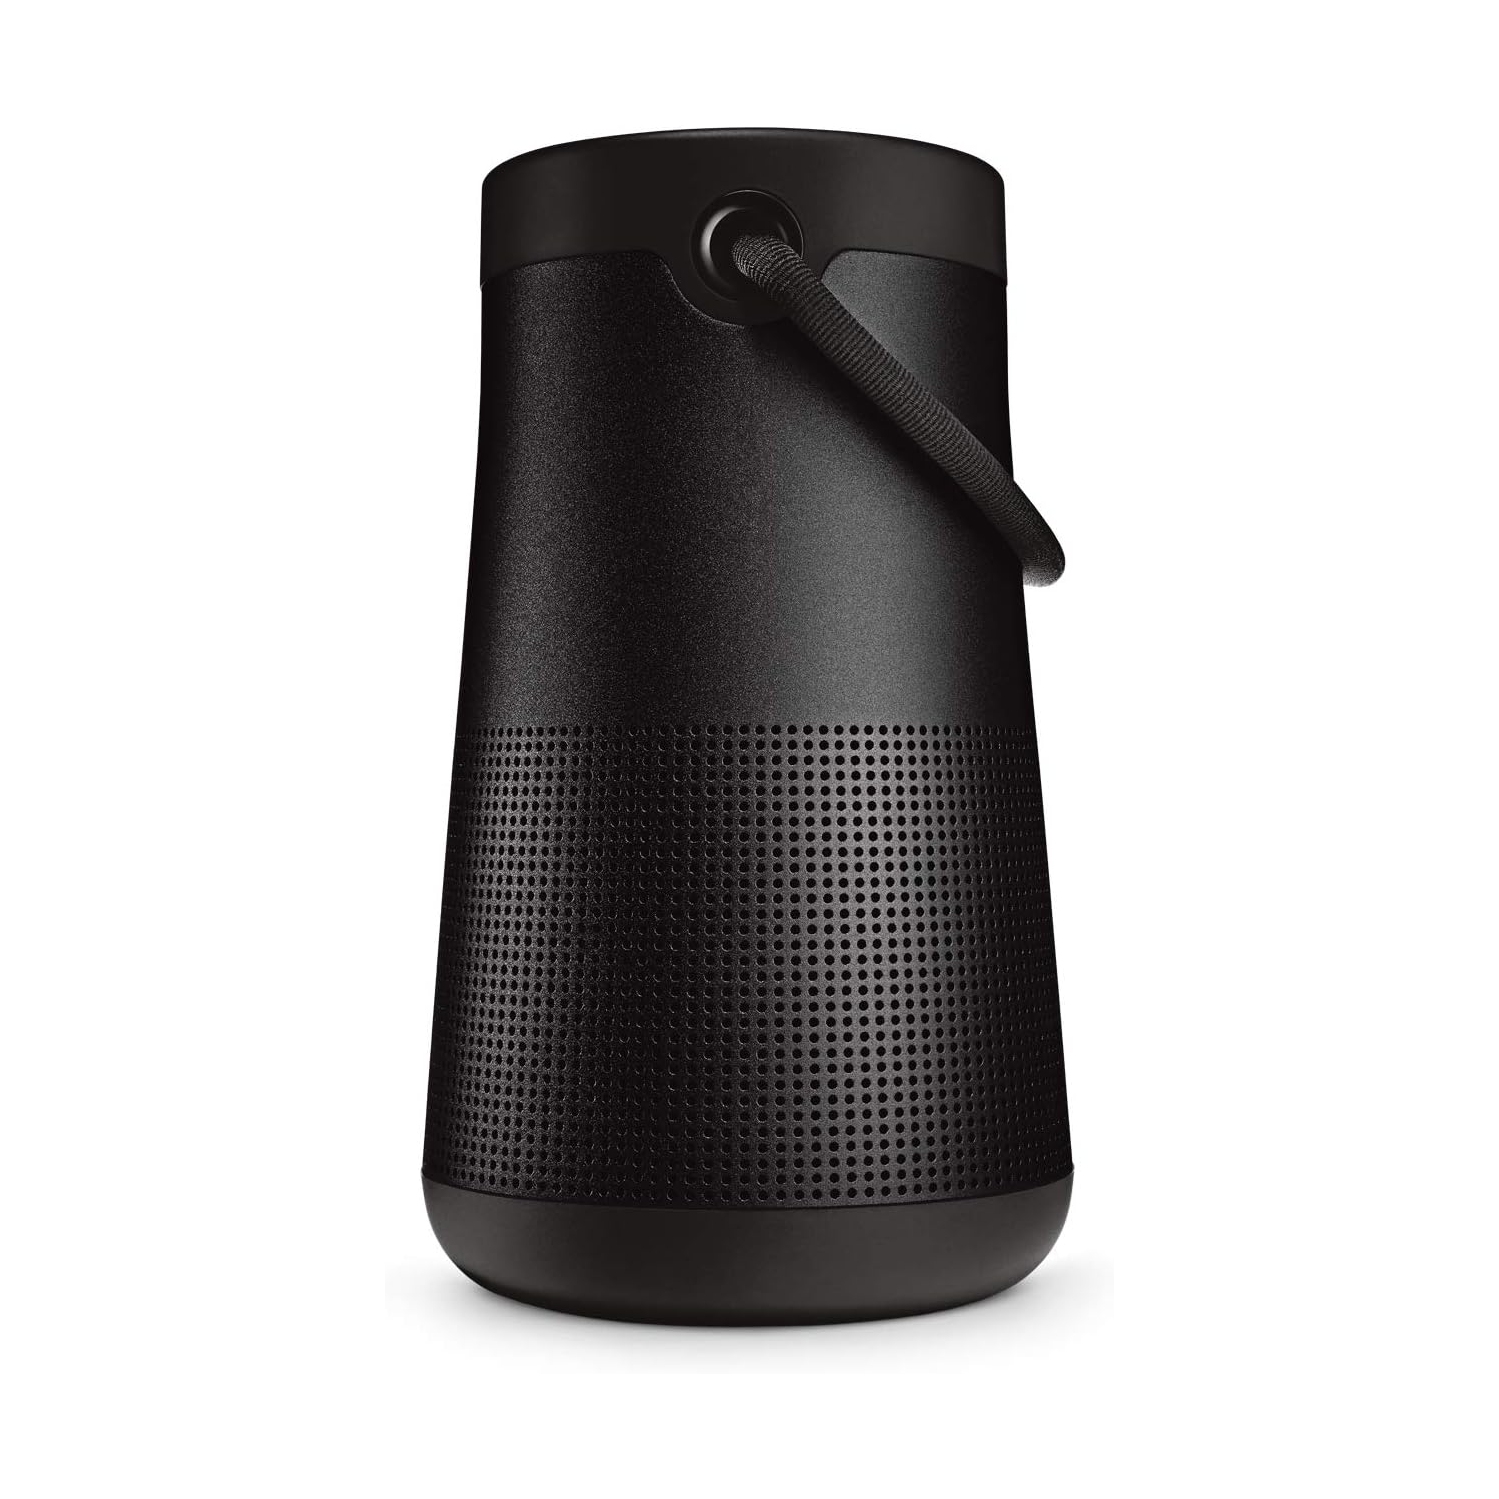 Bose SoundLink Revolve+ (Series II) Portable Bluetooth Speaker - Wireless Water-Resistant Speaker with Long-Lasting Battery and Handle, Black